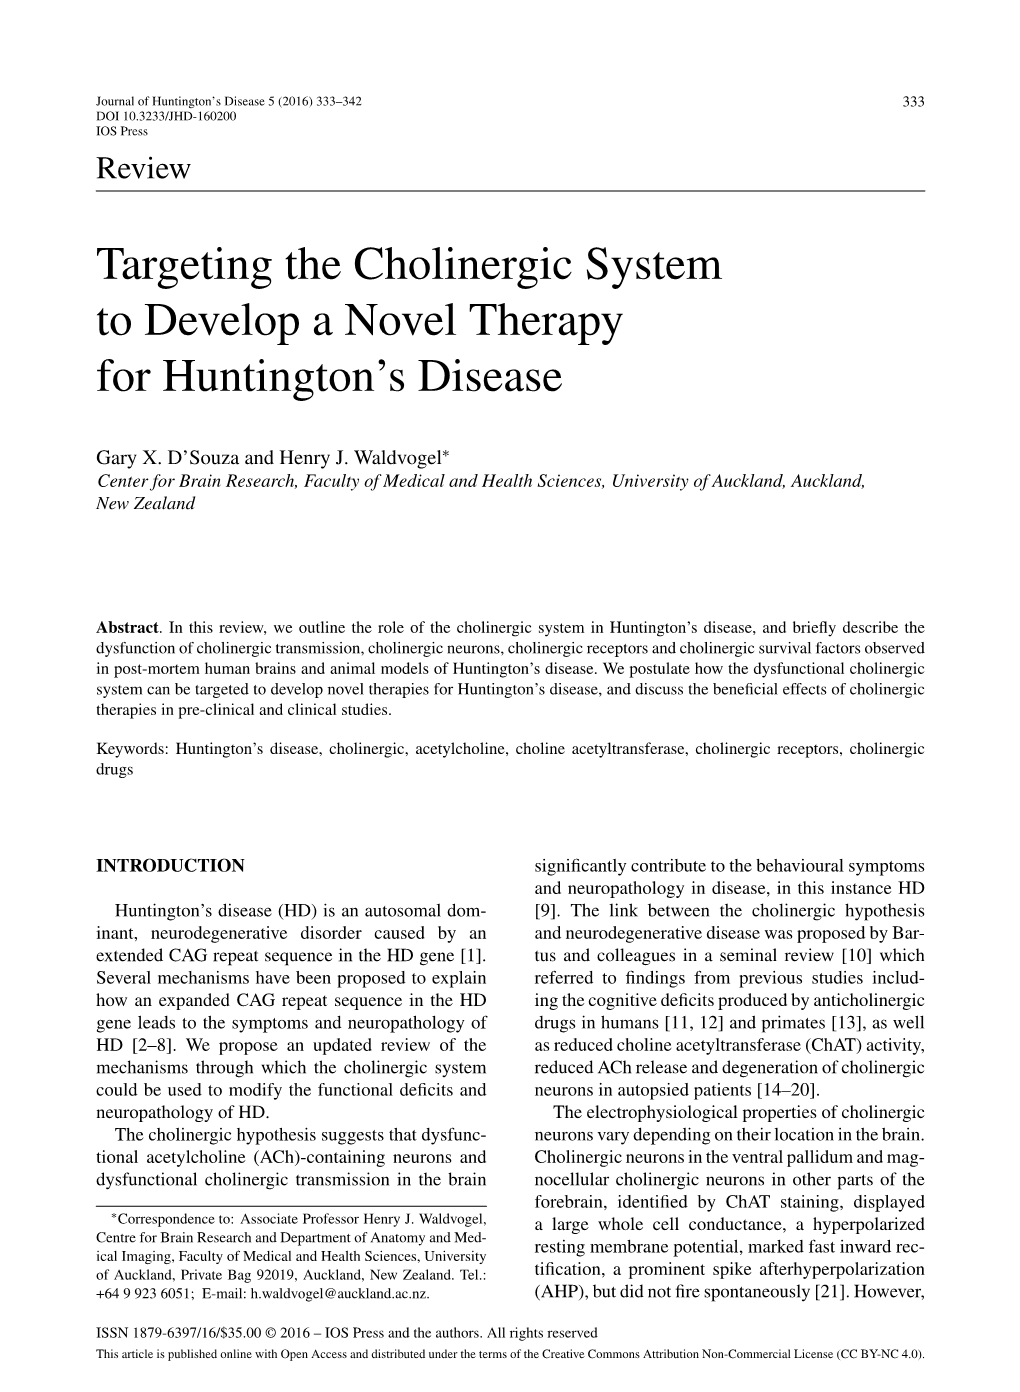 Targeting the Cholinergic System to Develop a Novel Therapy for Huntington’S Disease